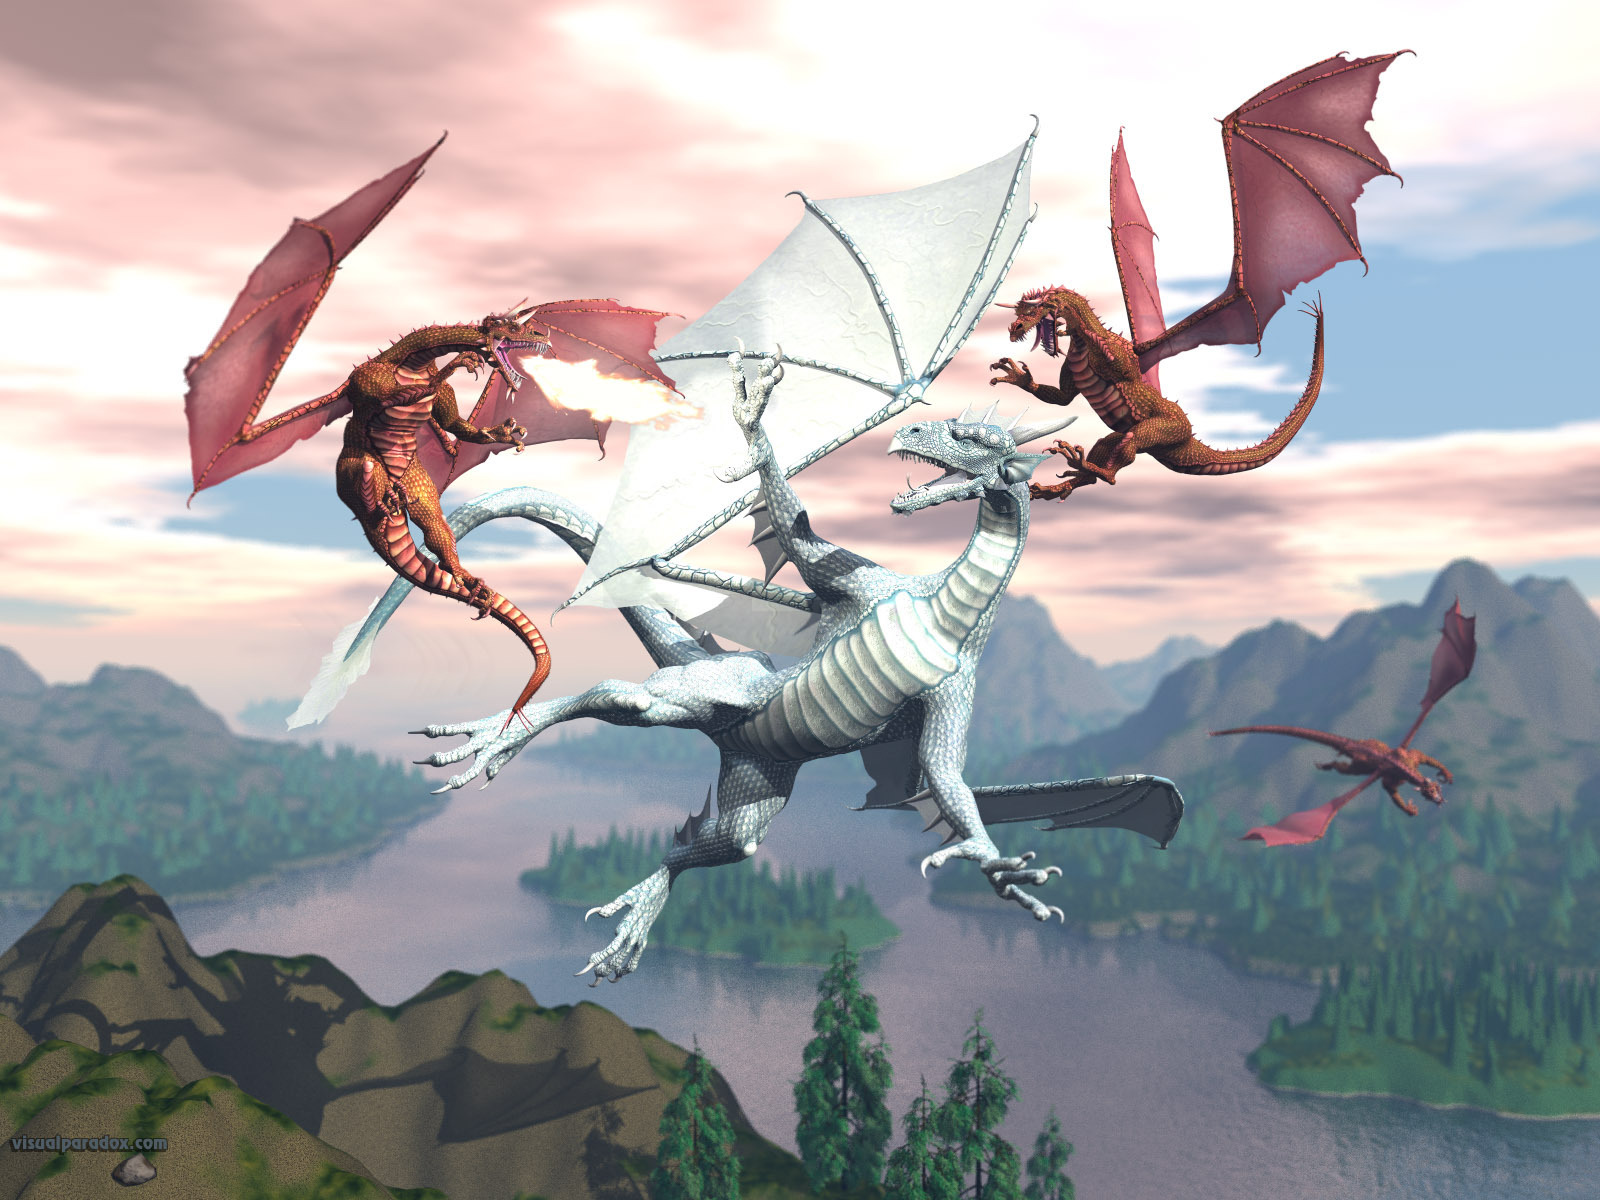 Dragons images Dragon Fight wallpaper photos 1149427